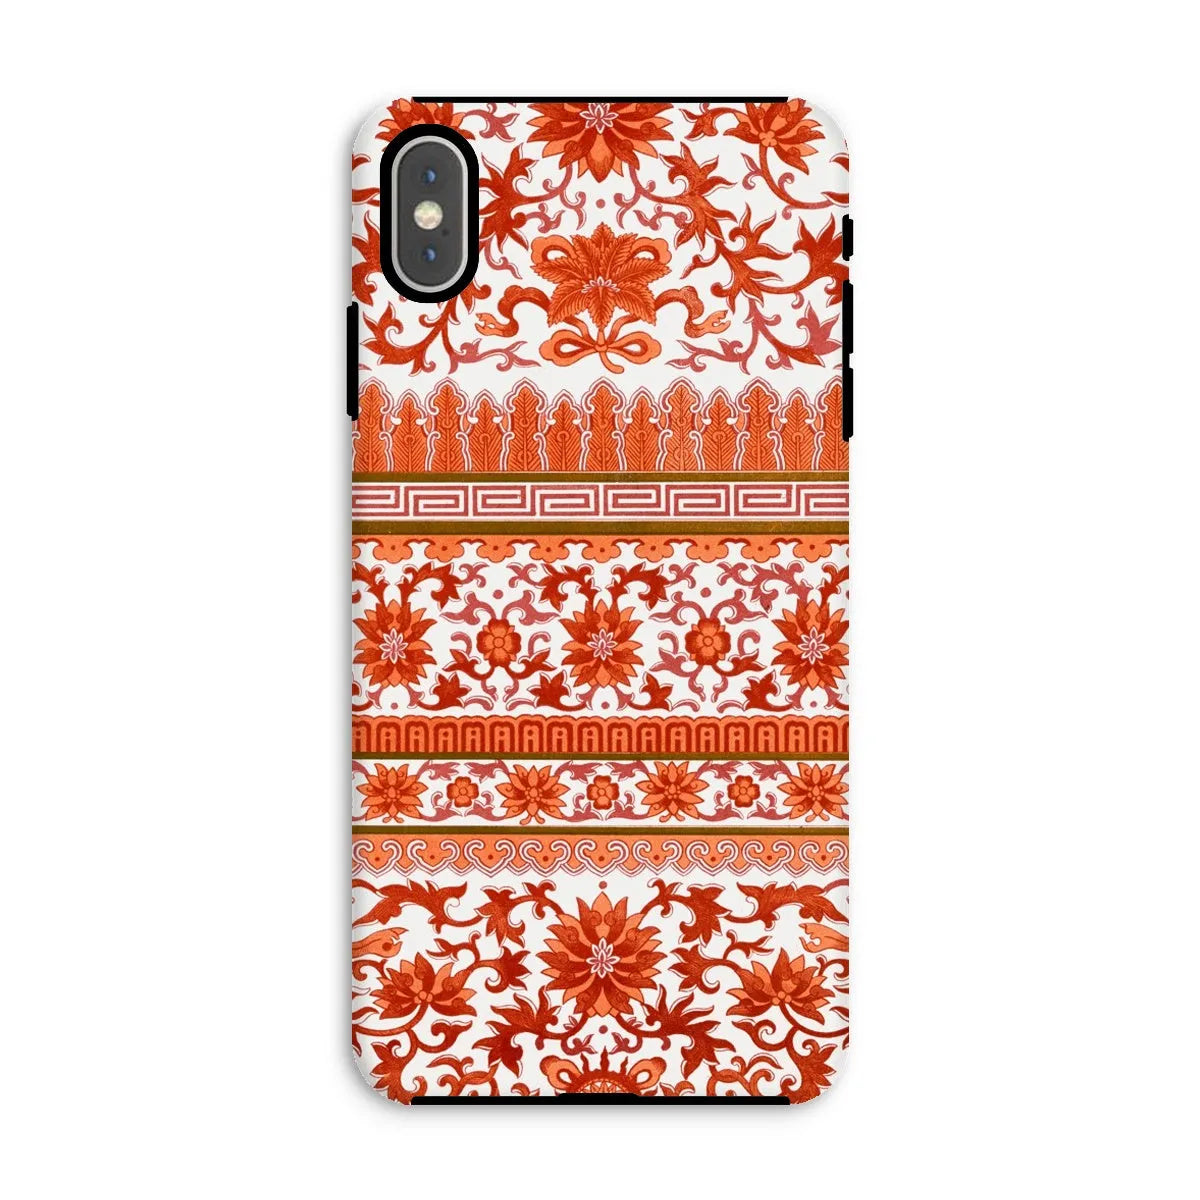 Fiery Chinese Floral Aesthetic Art Phone Case - Owen Jones - Iphone Xs Max / Matte - Mobile Phone Cases - Aesthetic Art